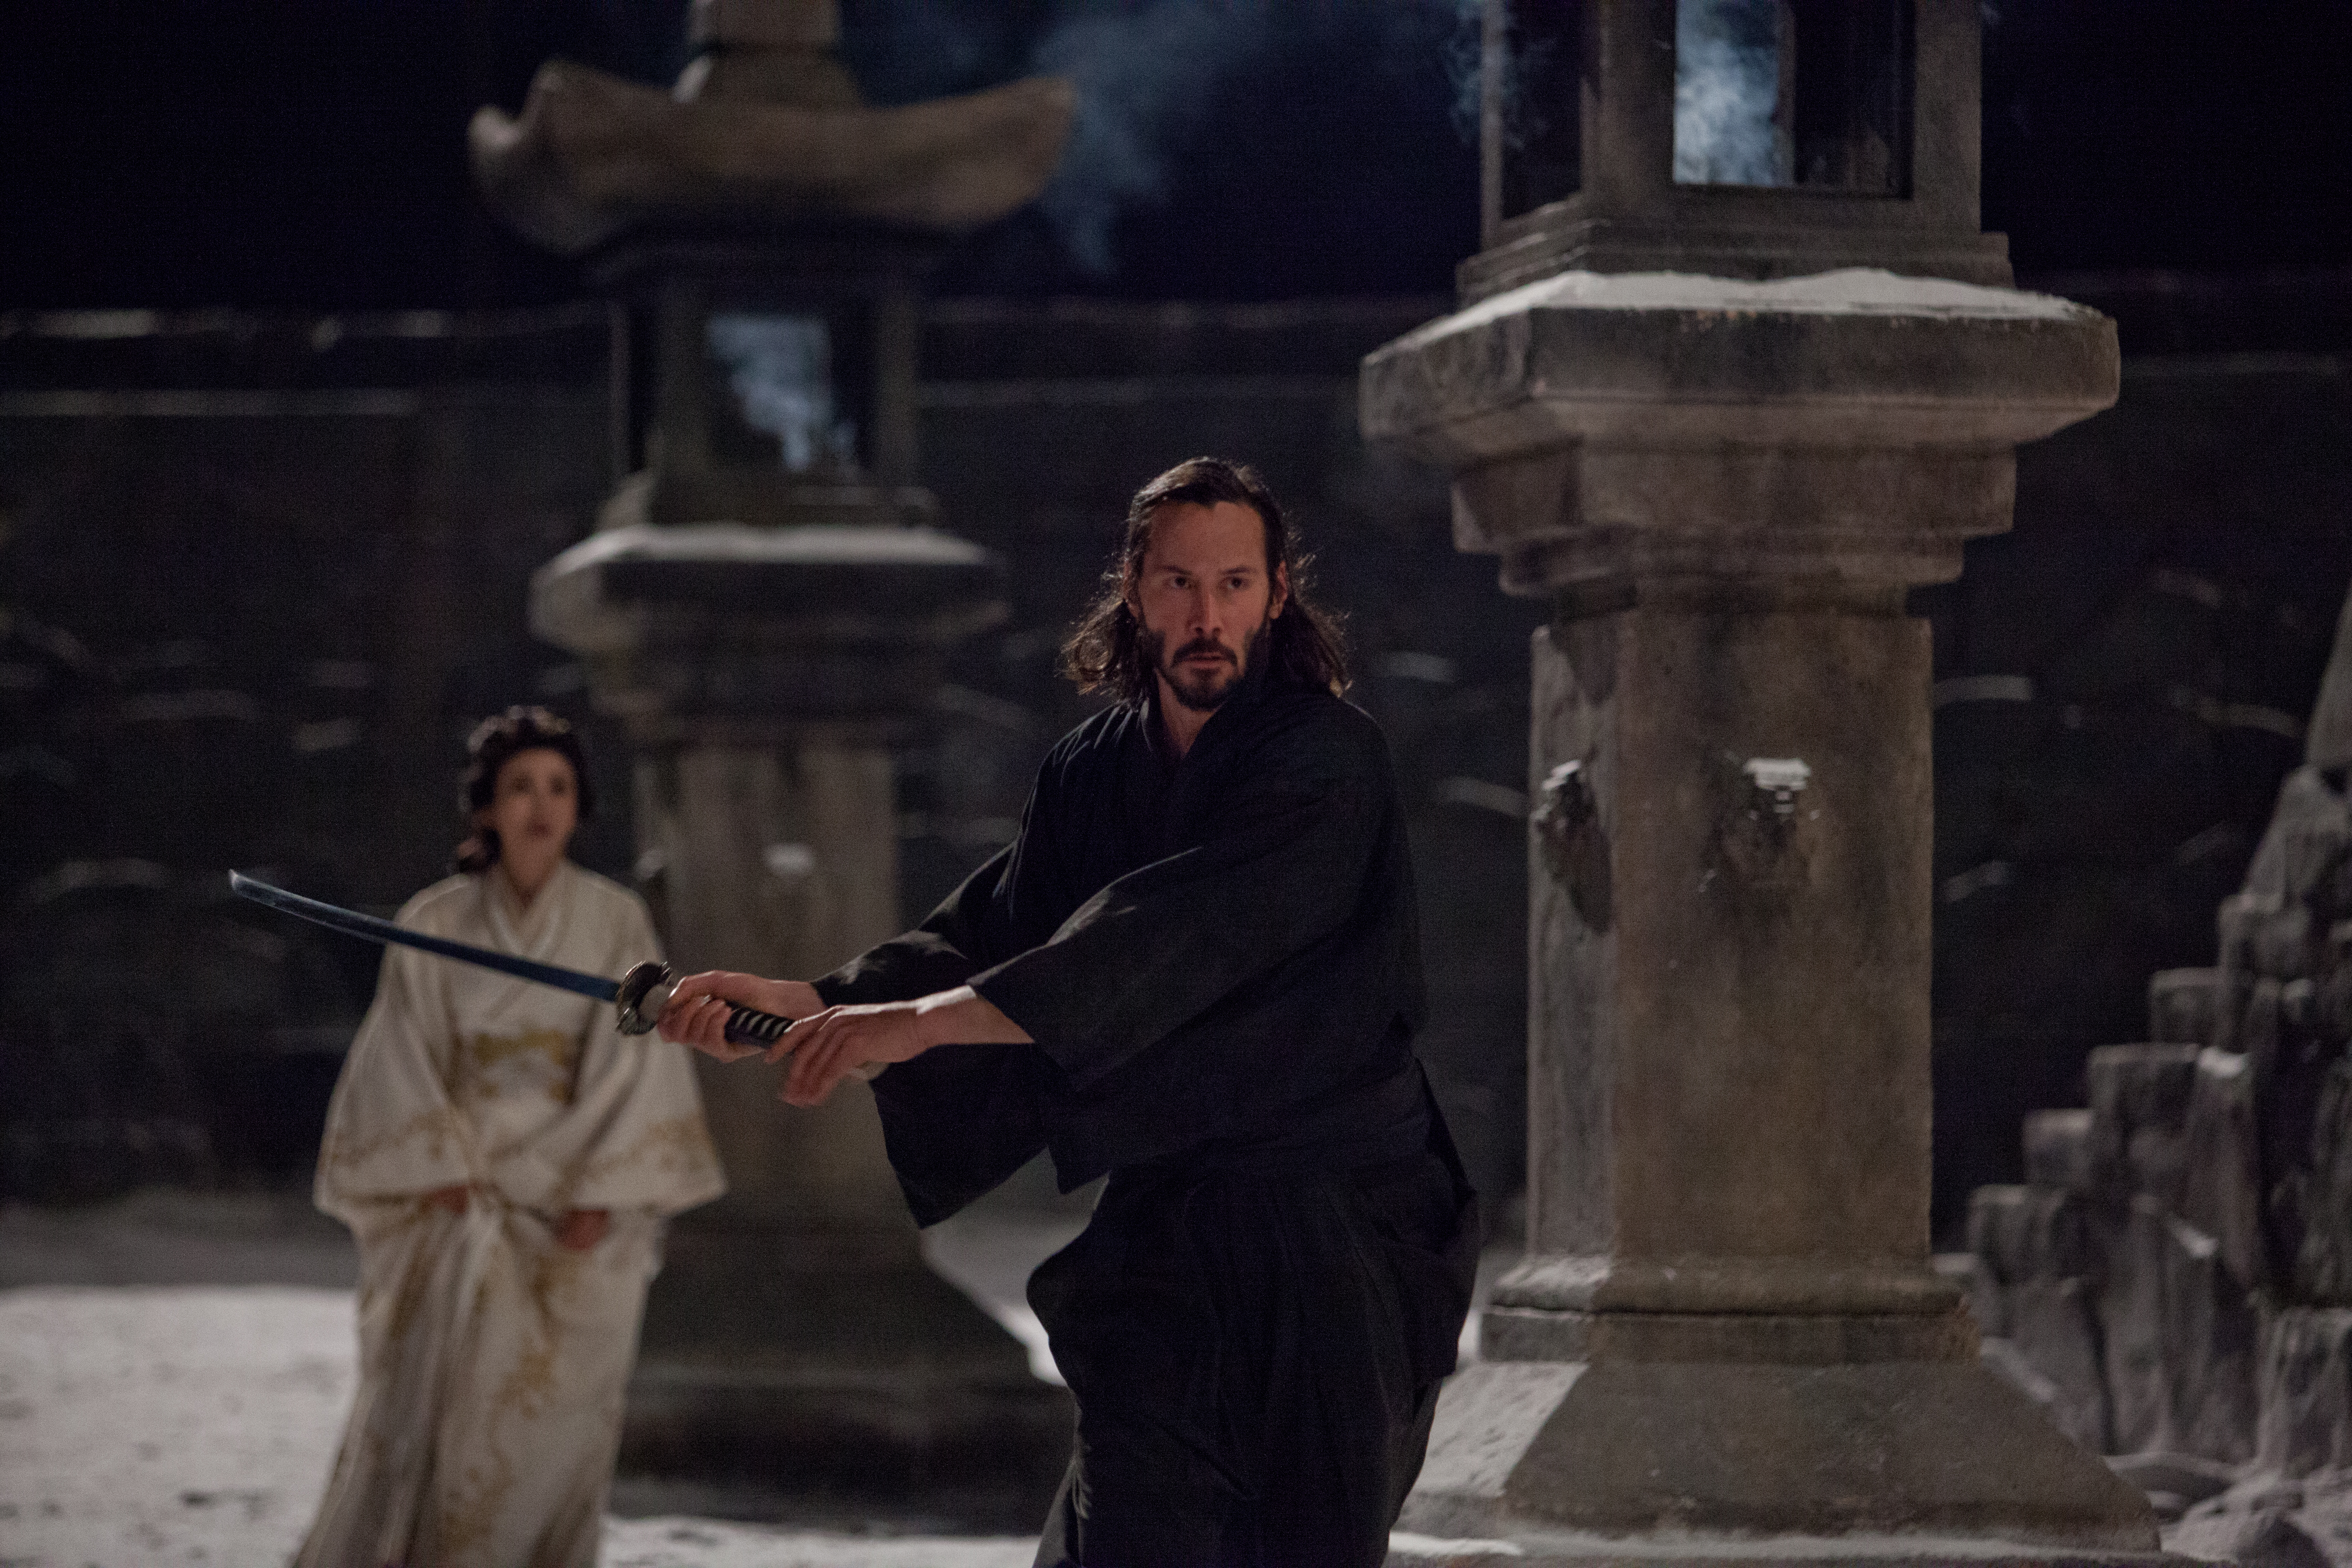 「47RONIN」より　© 2013 Universal Studios. All Rights Reserved.